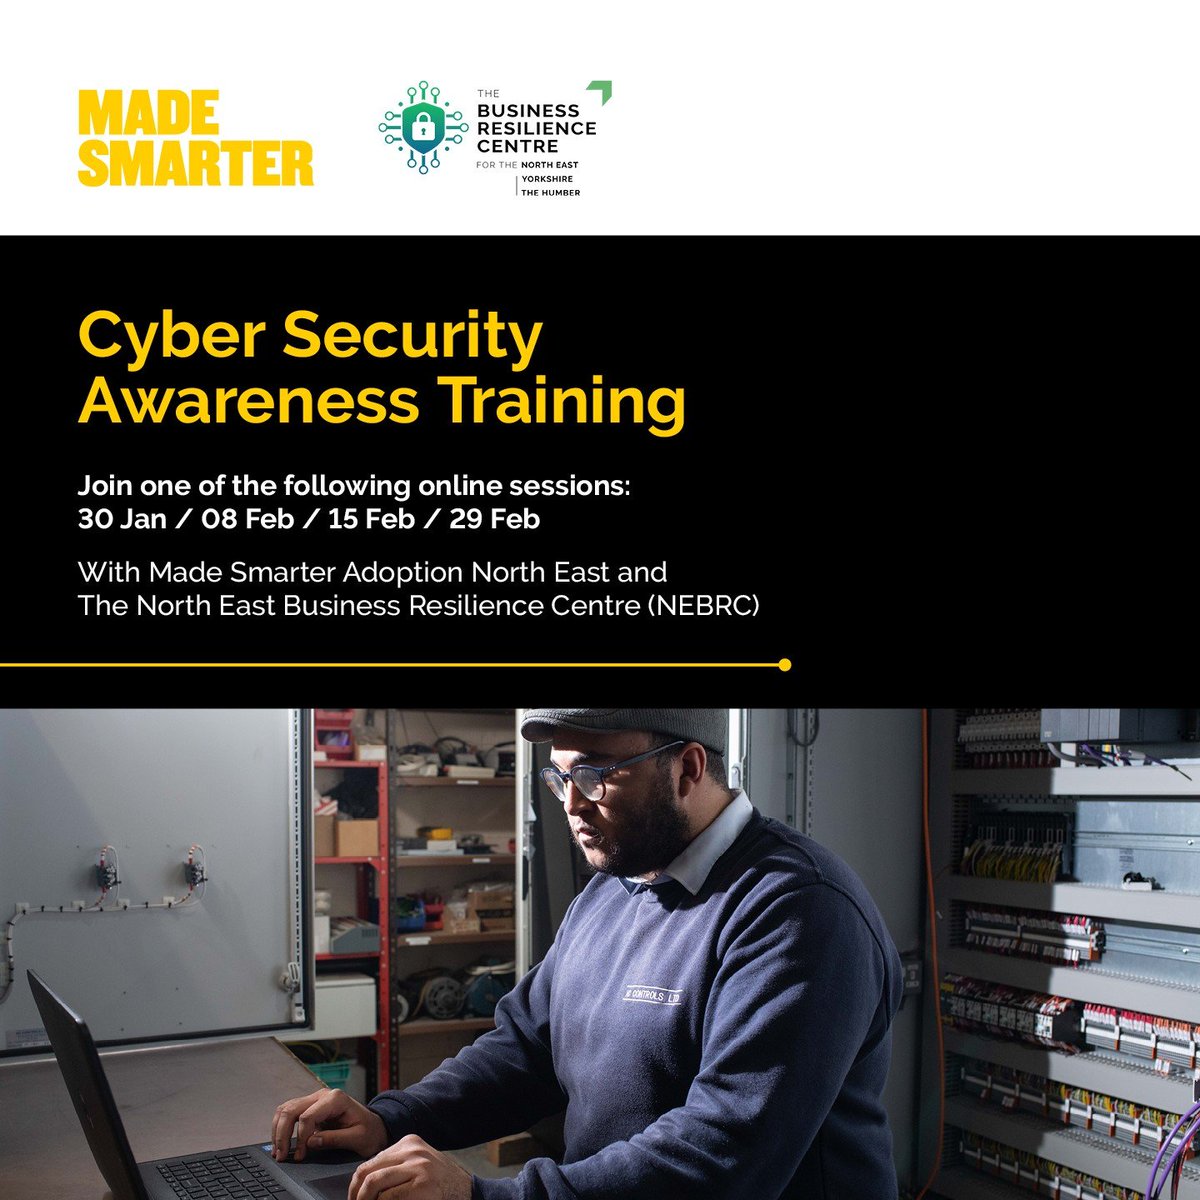 Around 1/2 SMEs experience at least one cyber attack each year. This free cyber security awareness training from Made Smarter Adoption North East will help protect your business from attack. orlo.uk/GY4Gb